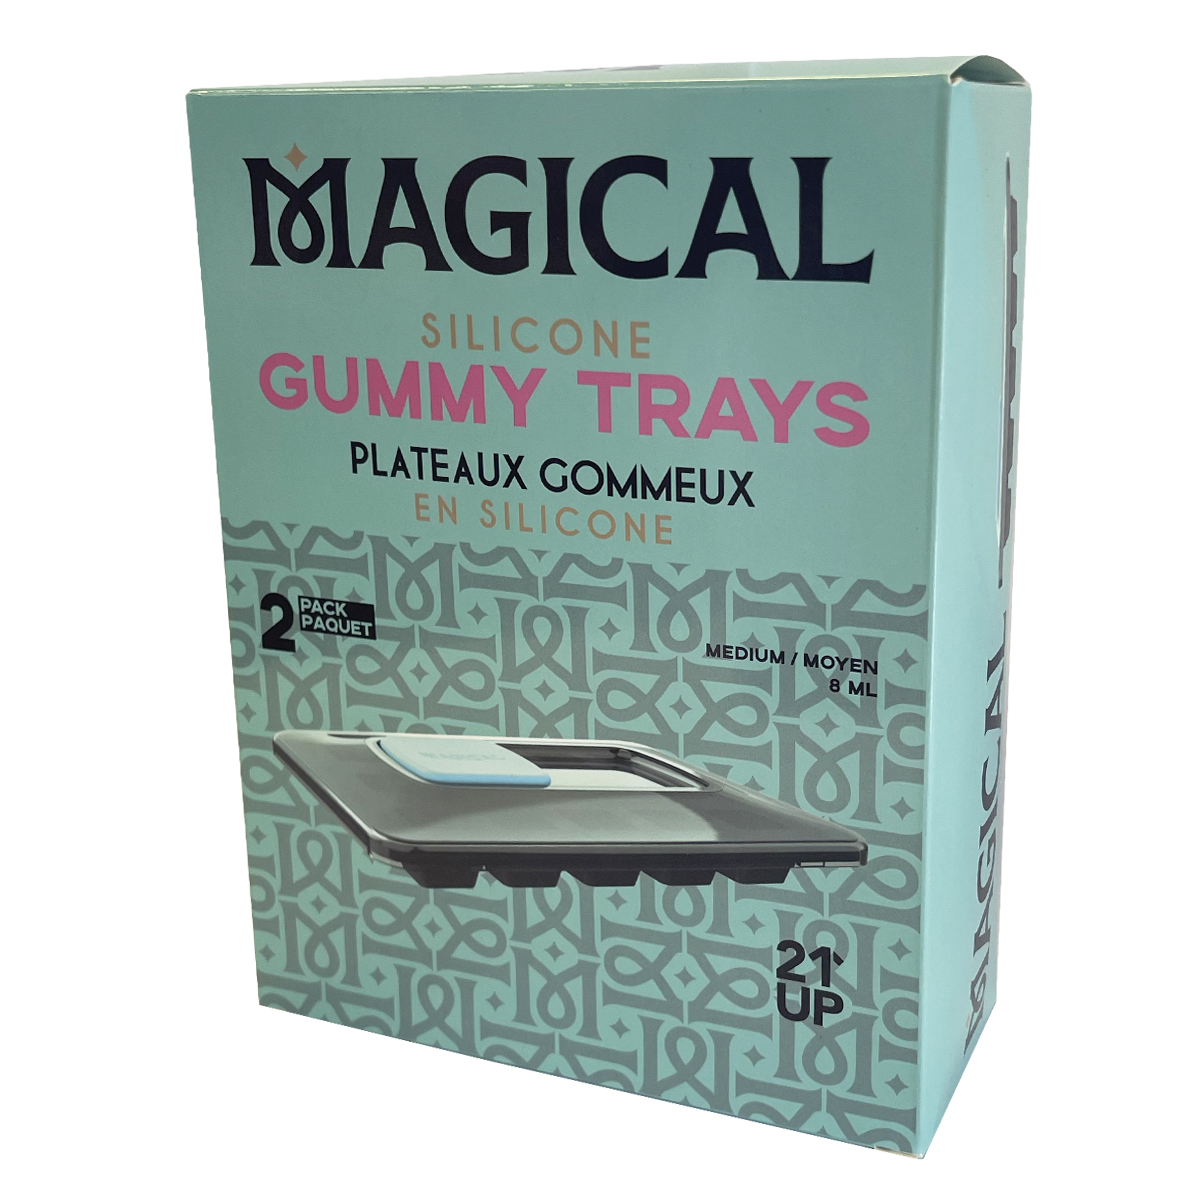 Magical Butter 21UP 8ml Gummy Tray – 2 Pack